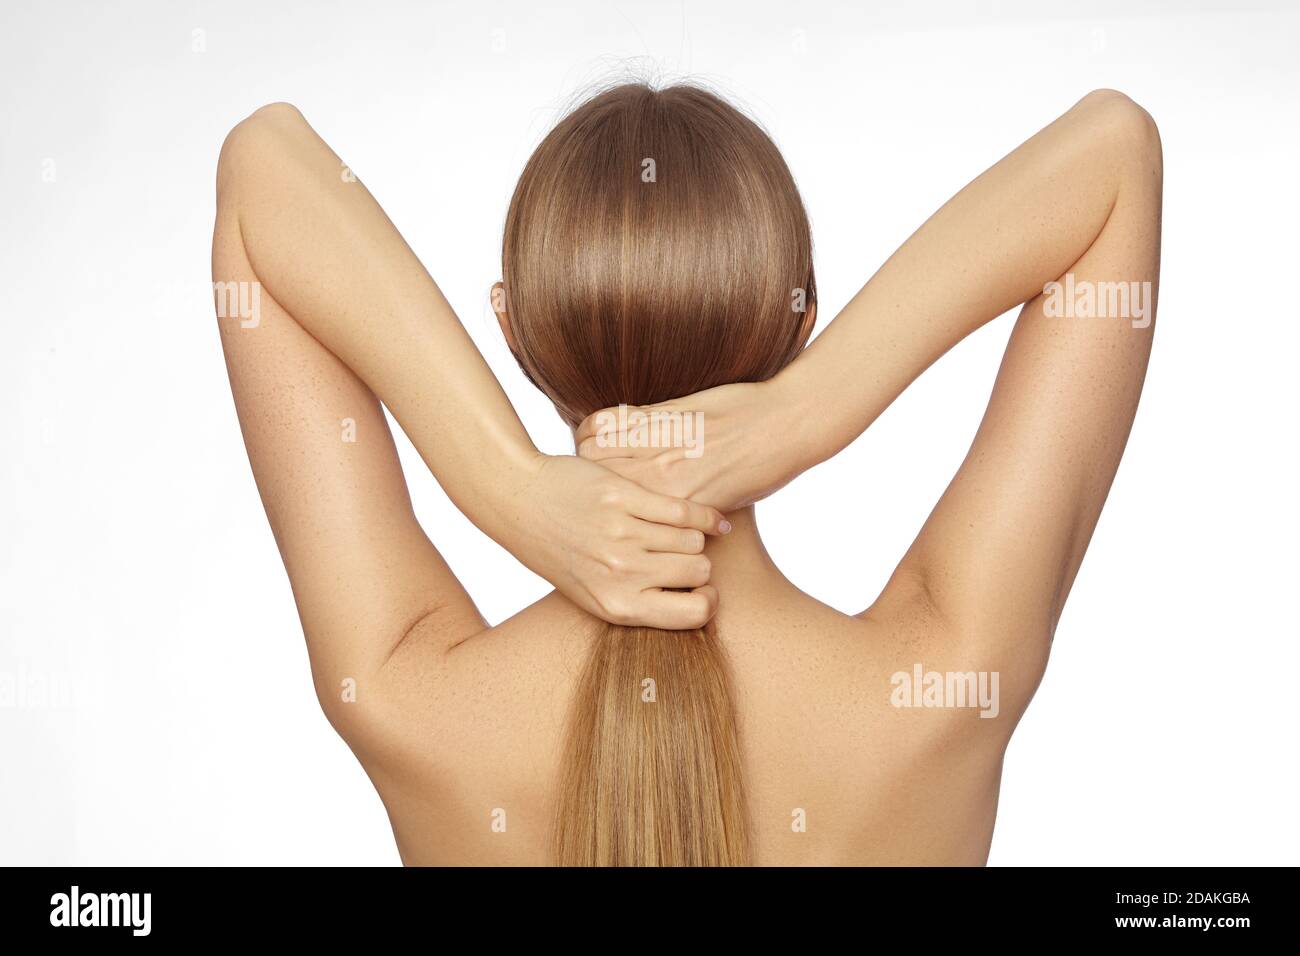 Healthy Shiny Long Hair in Tale. Beautiful Girl holding her Hair in hand.  Back view on white. Smooth Hairstyle with strong Hair Stock Photo - Alamy